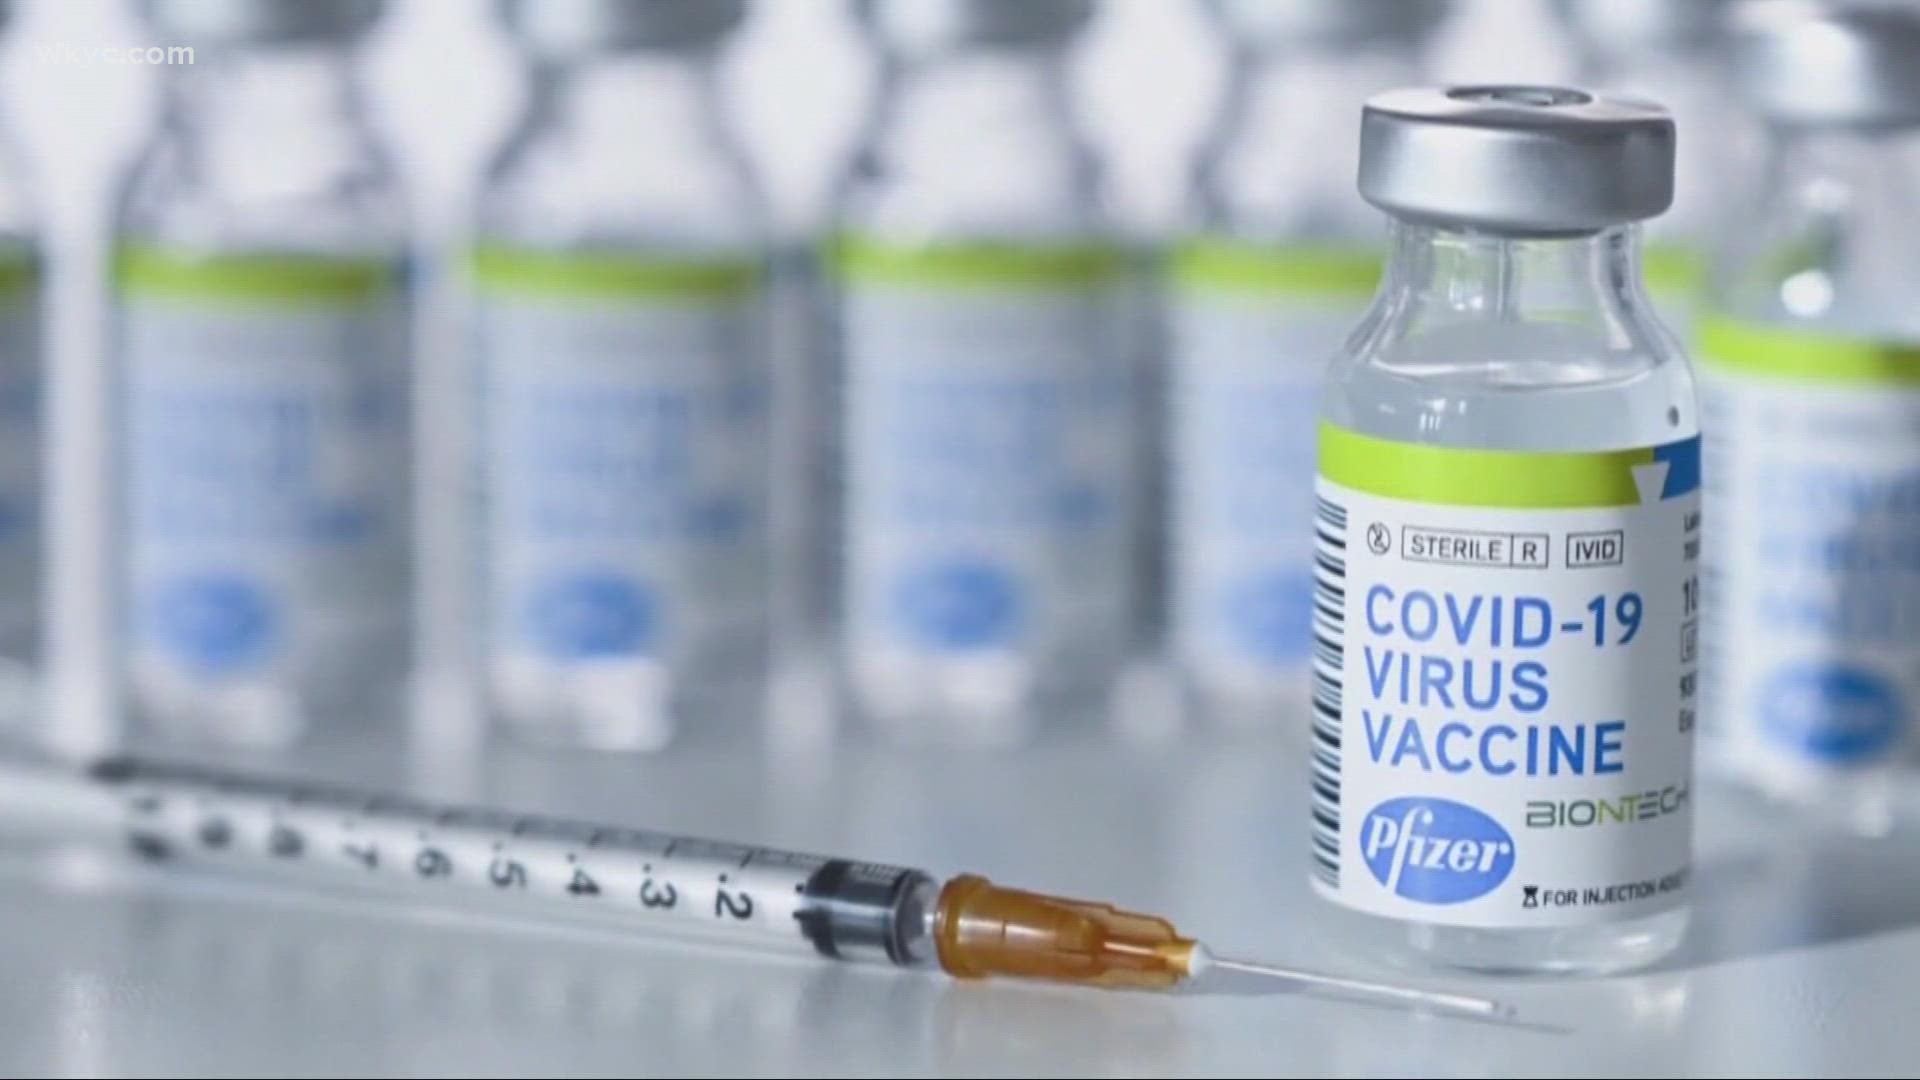 Greater Cleveland Congregations is setting up new covid-19 vaccine clinics at its member churches -- doling out the vaccine and up to $100 in cash along with it.